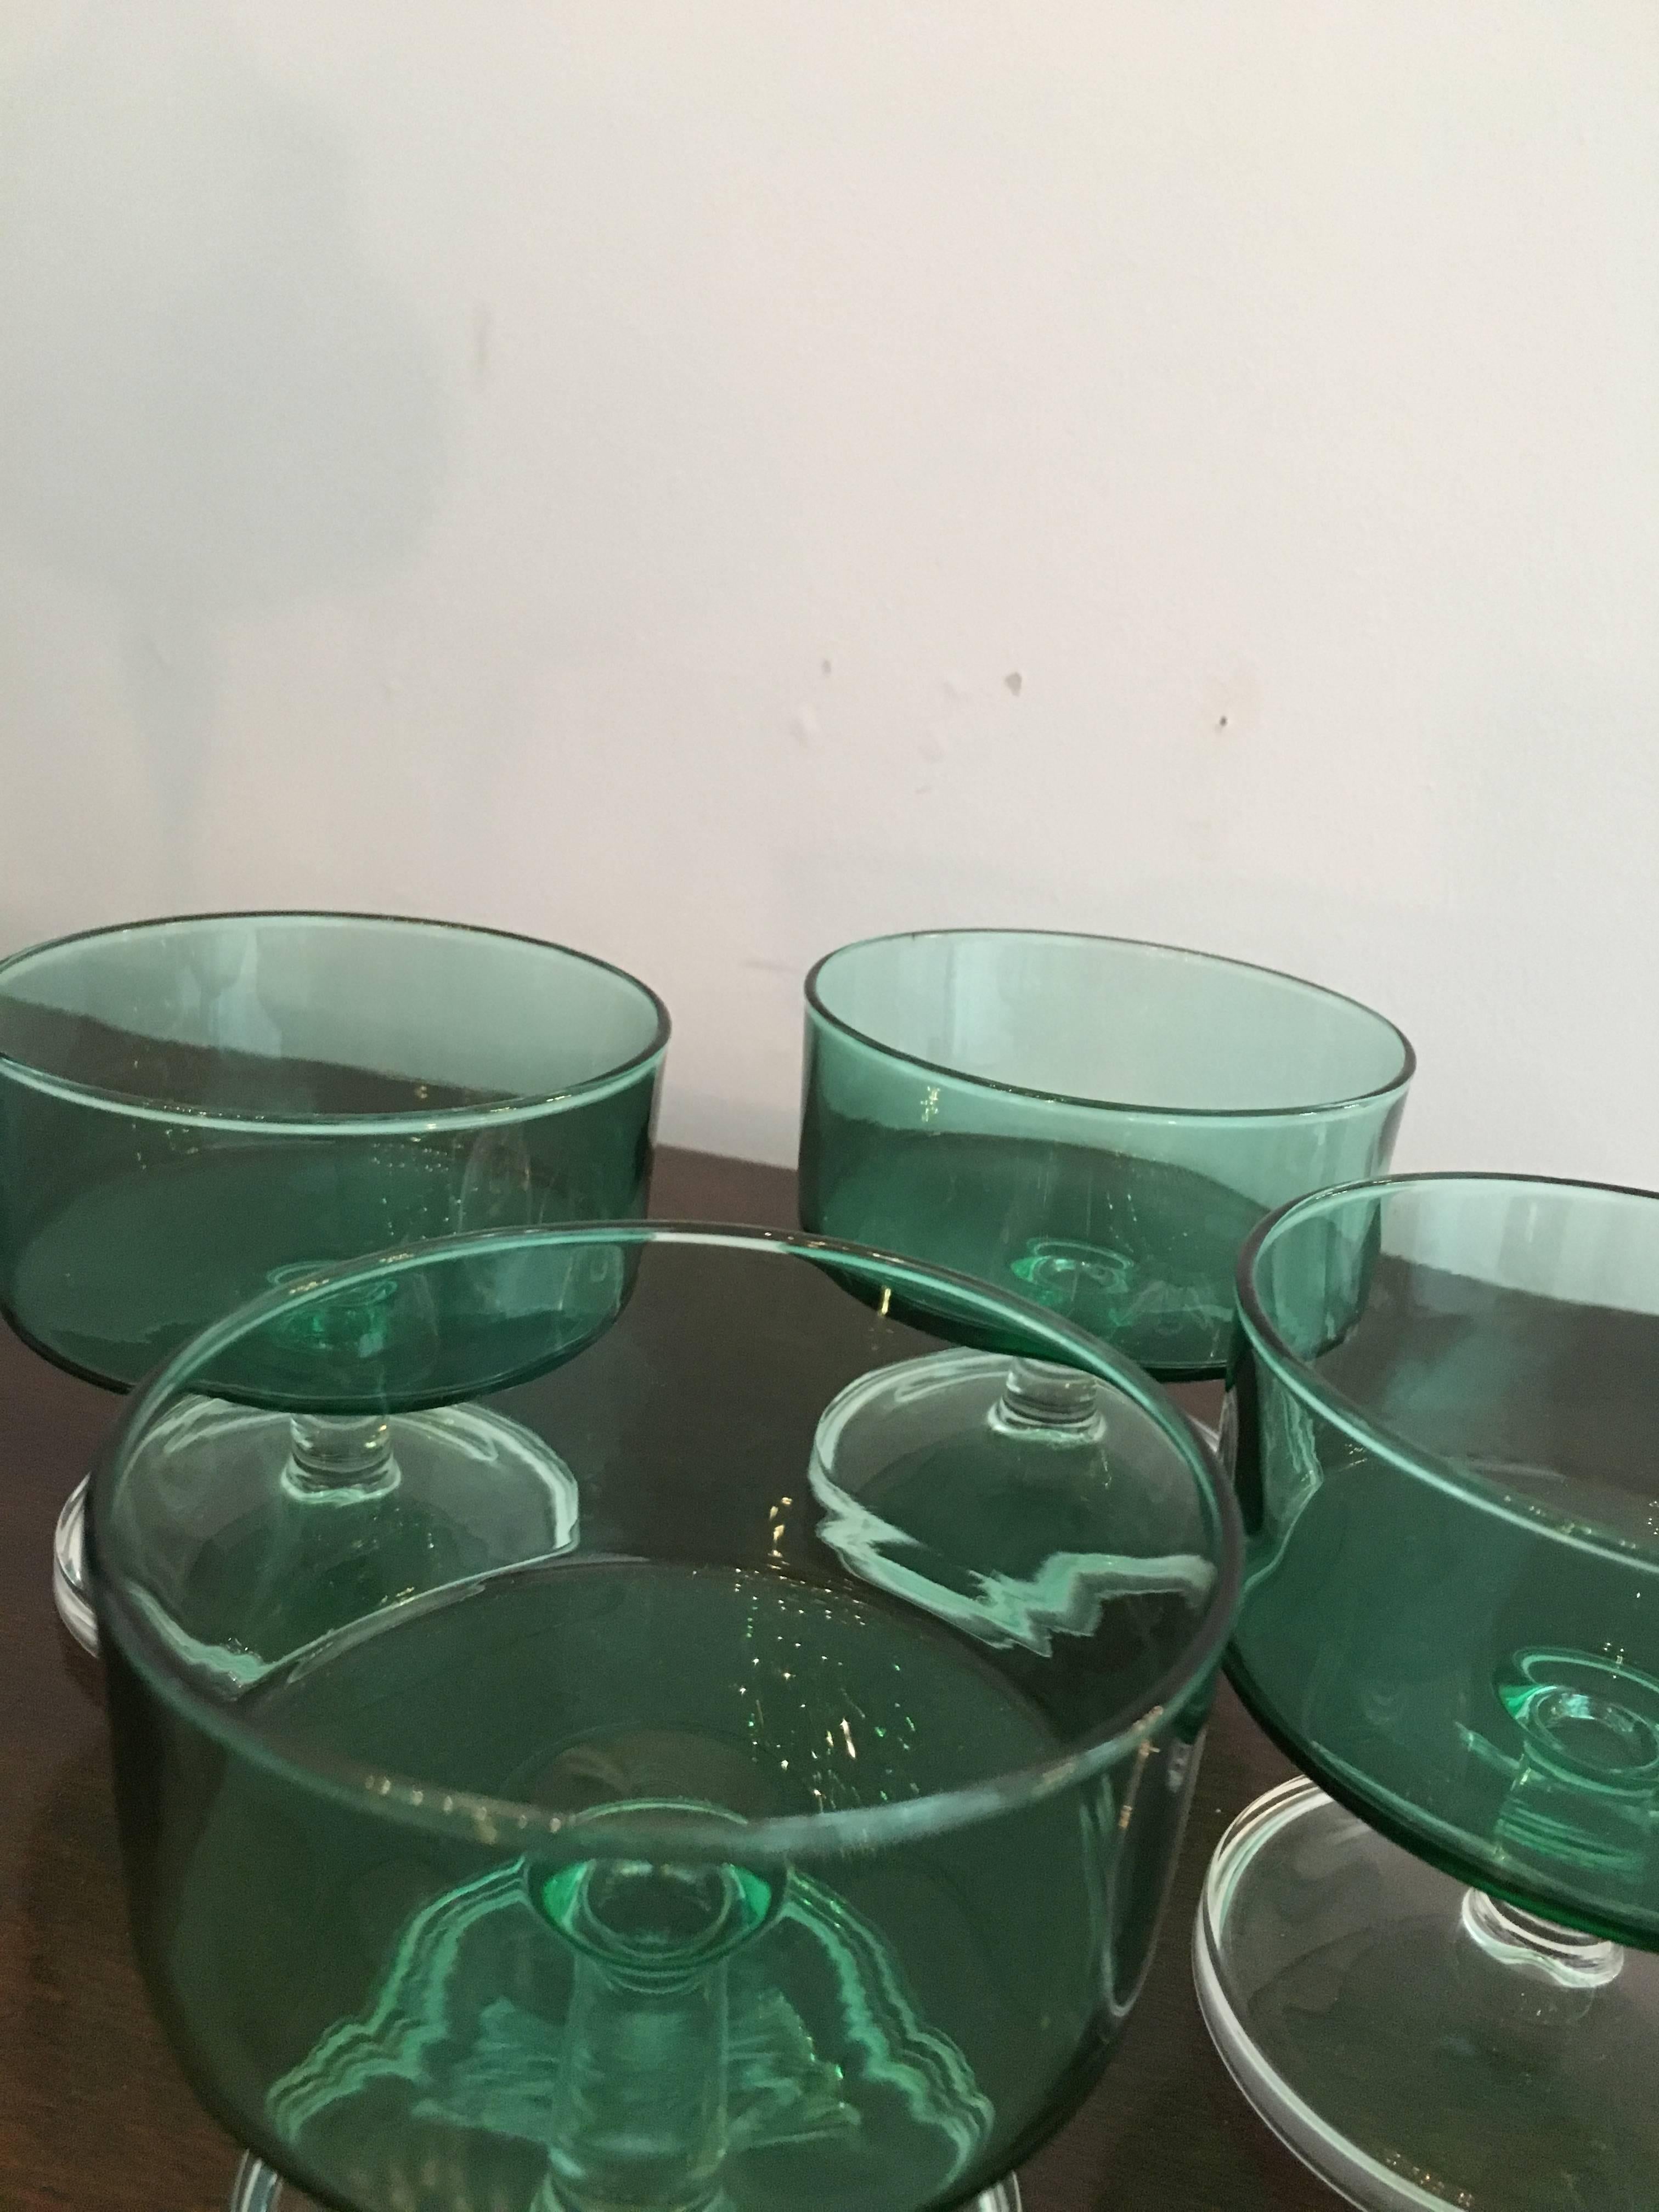 Offered is a mid century modern set of four 